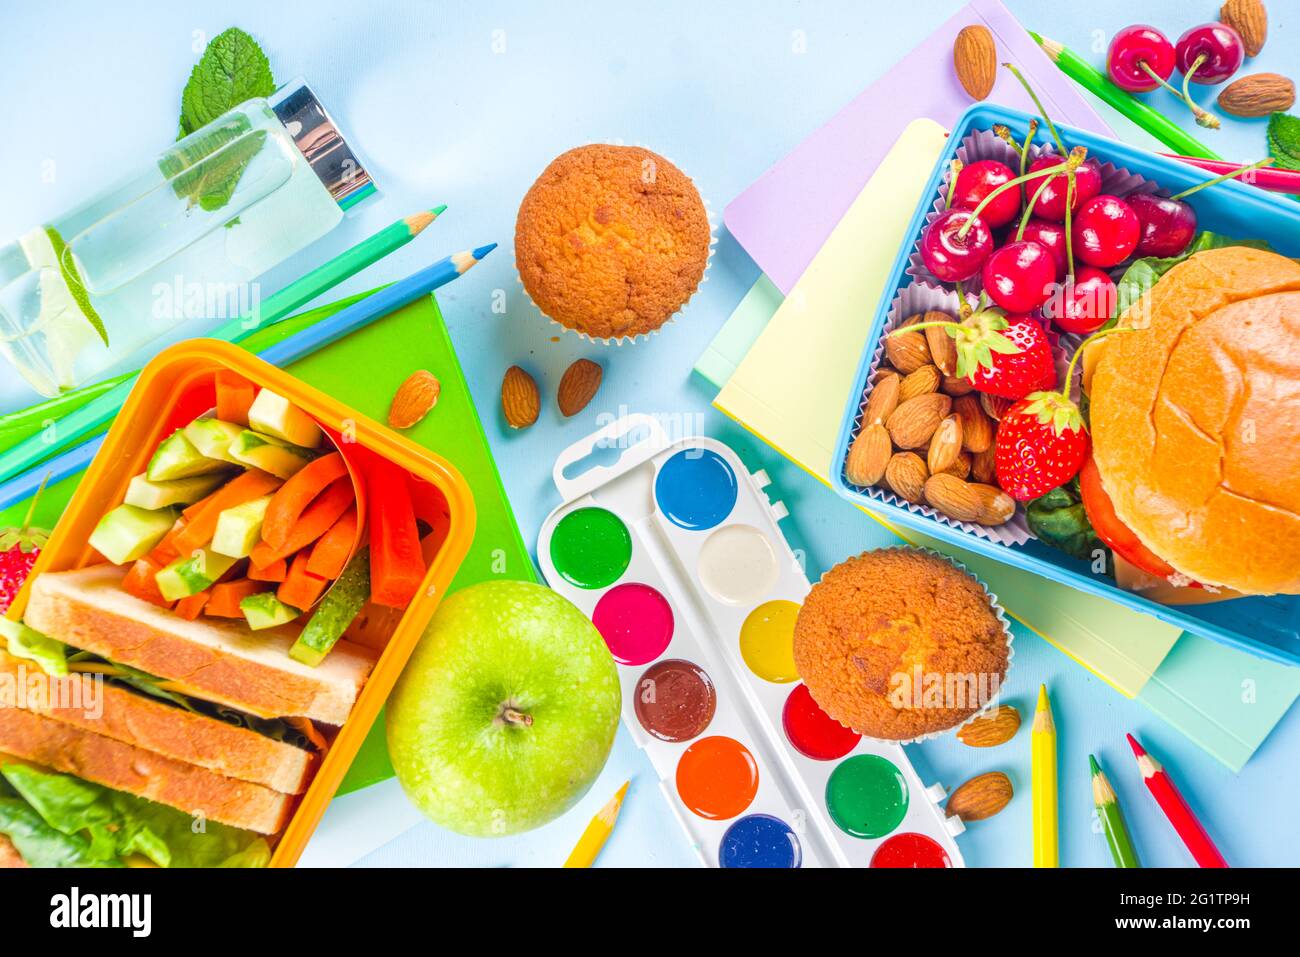 Back to school, Healthy tasty kid lunch box with sandwiches, nuts